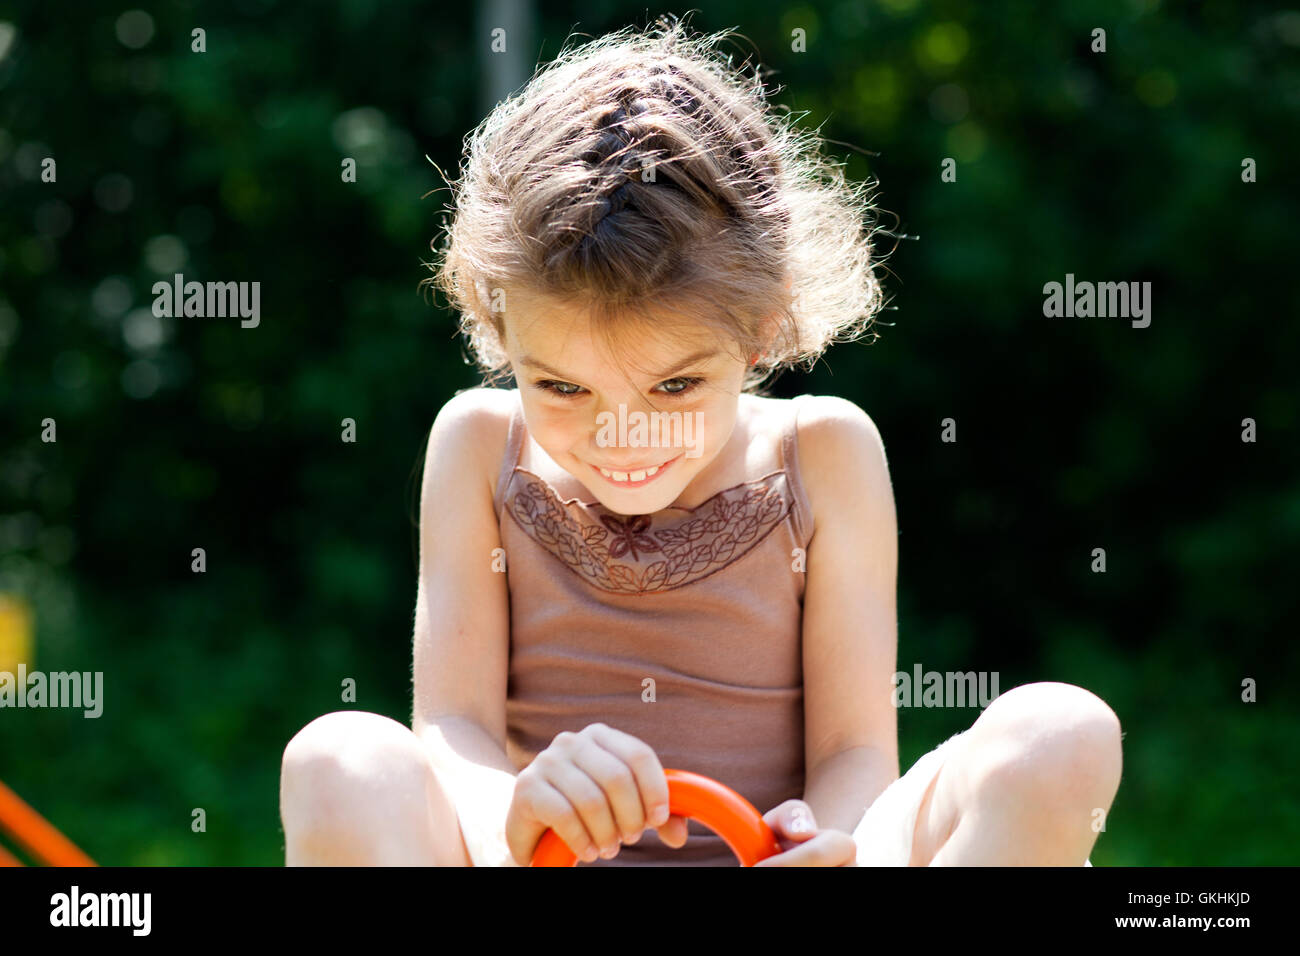 Portrait of beautiful little girl, against background of summer park Stock Photo